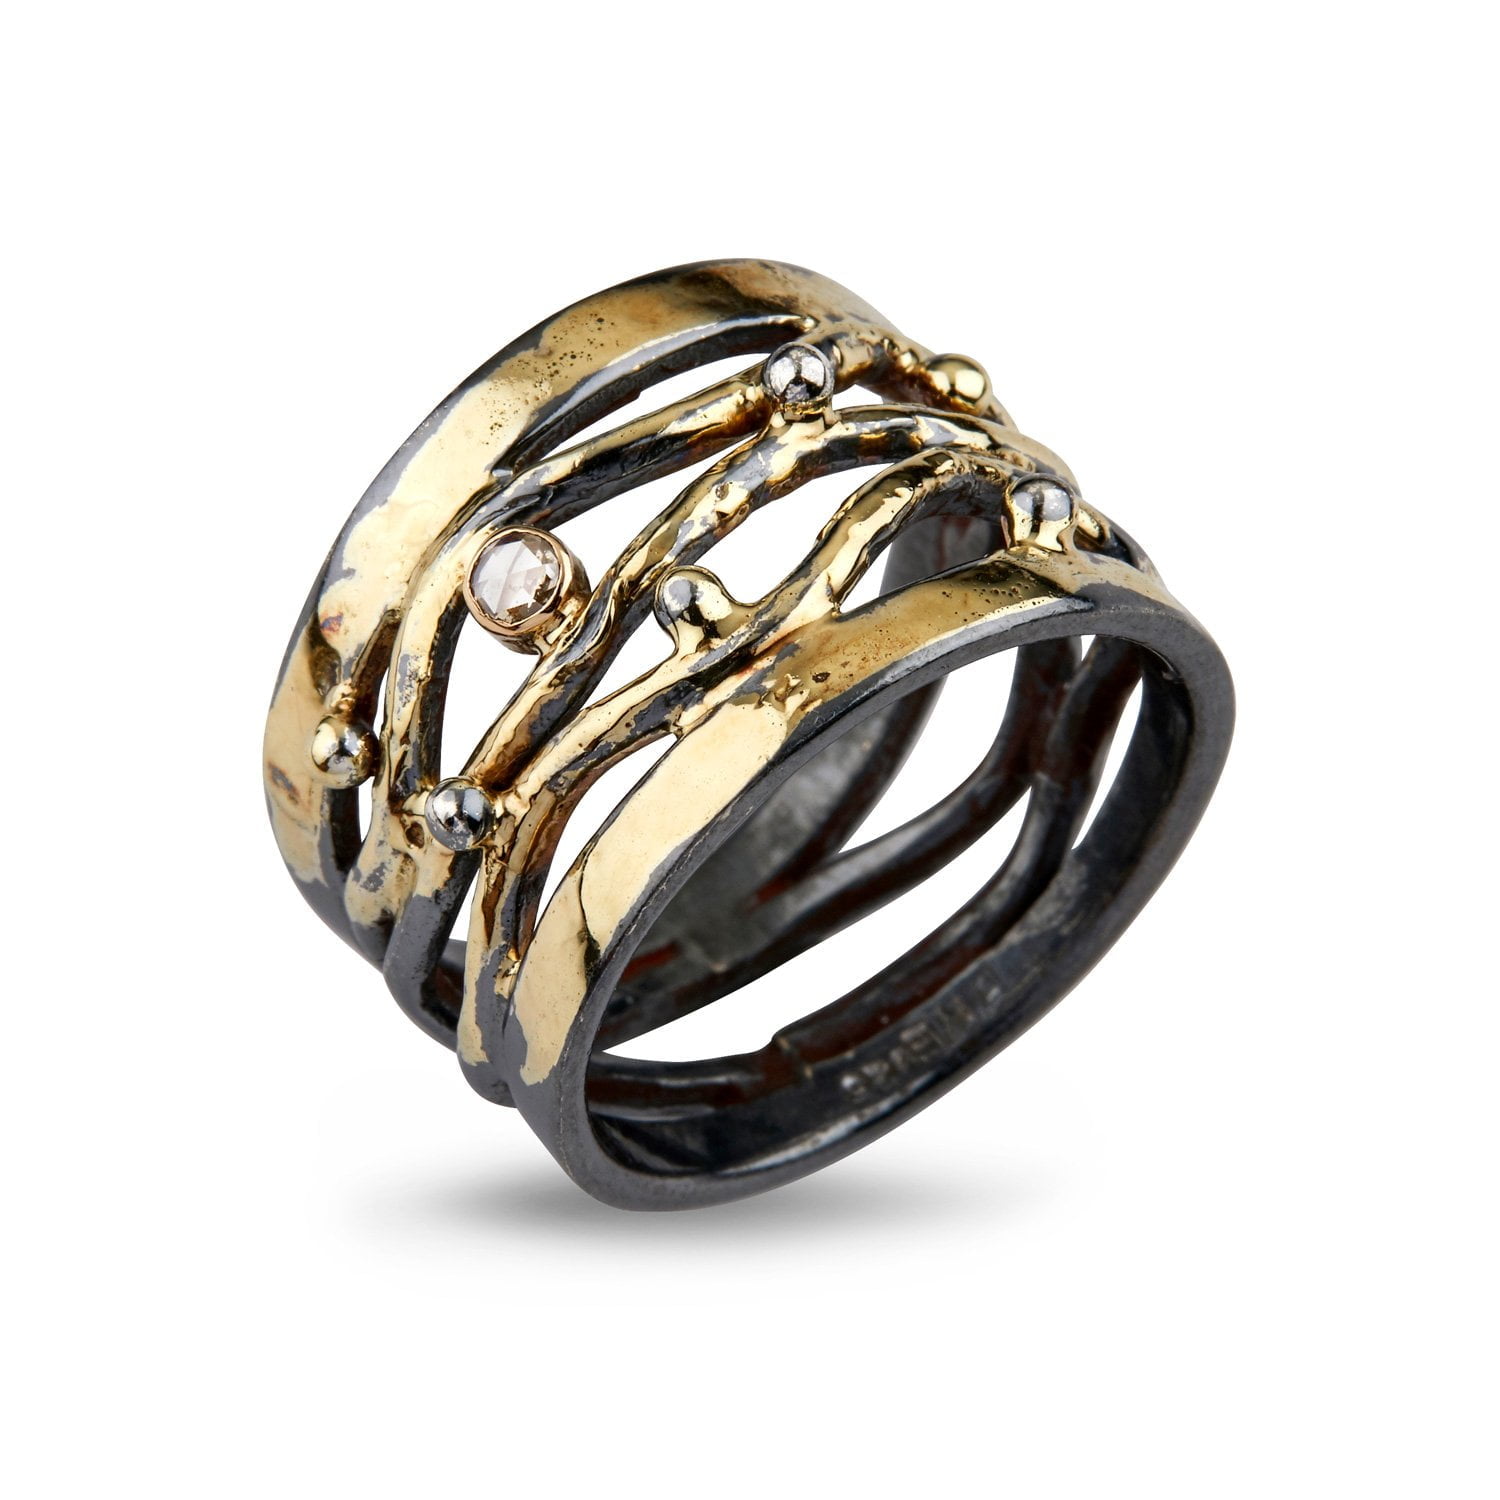 silver ring with open wires of gold and diamond